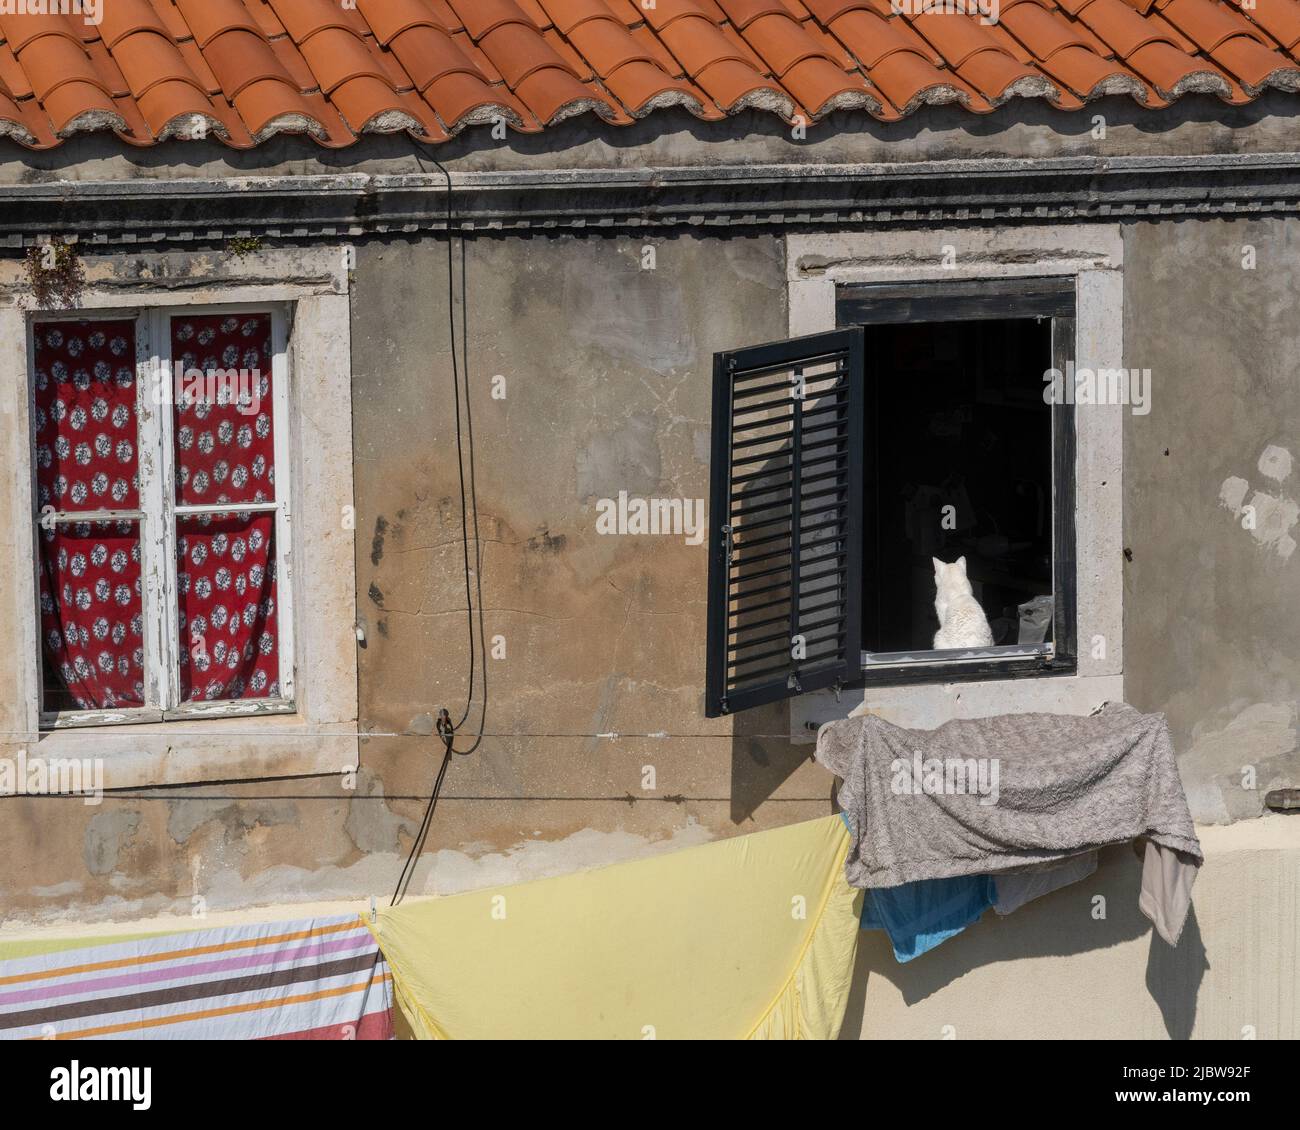 White Cat in Window above Laundry Drying on Clothesline, Old Town, Dubrovnik, Croatia Stock Photo